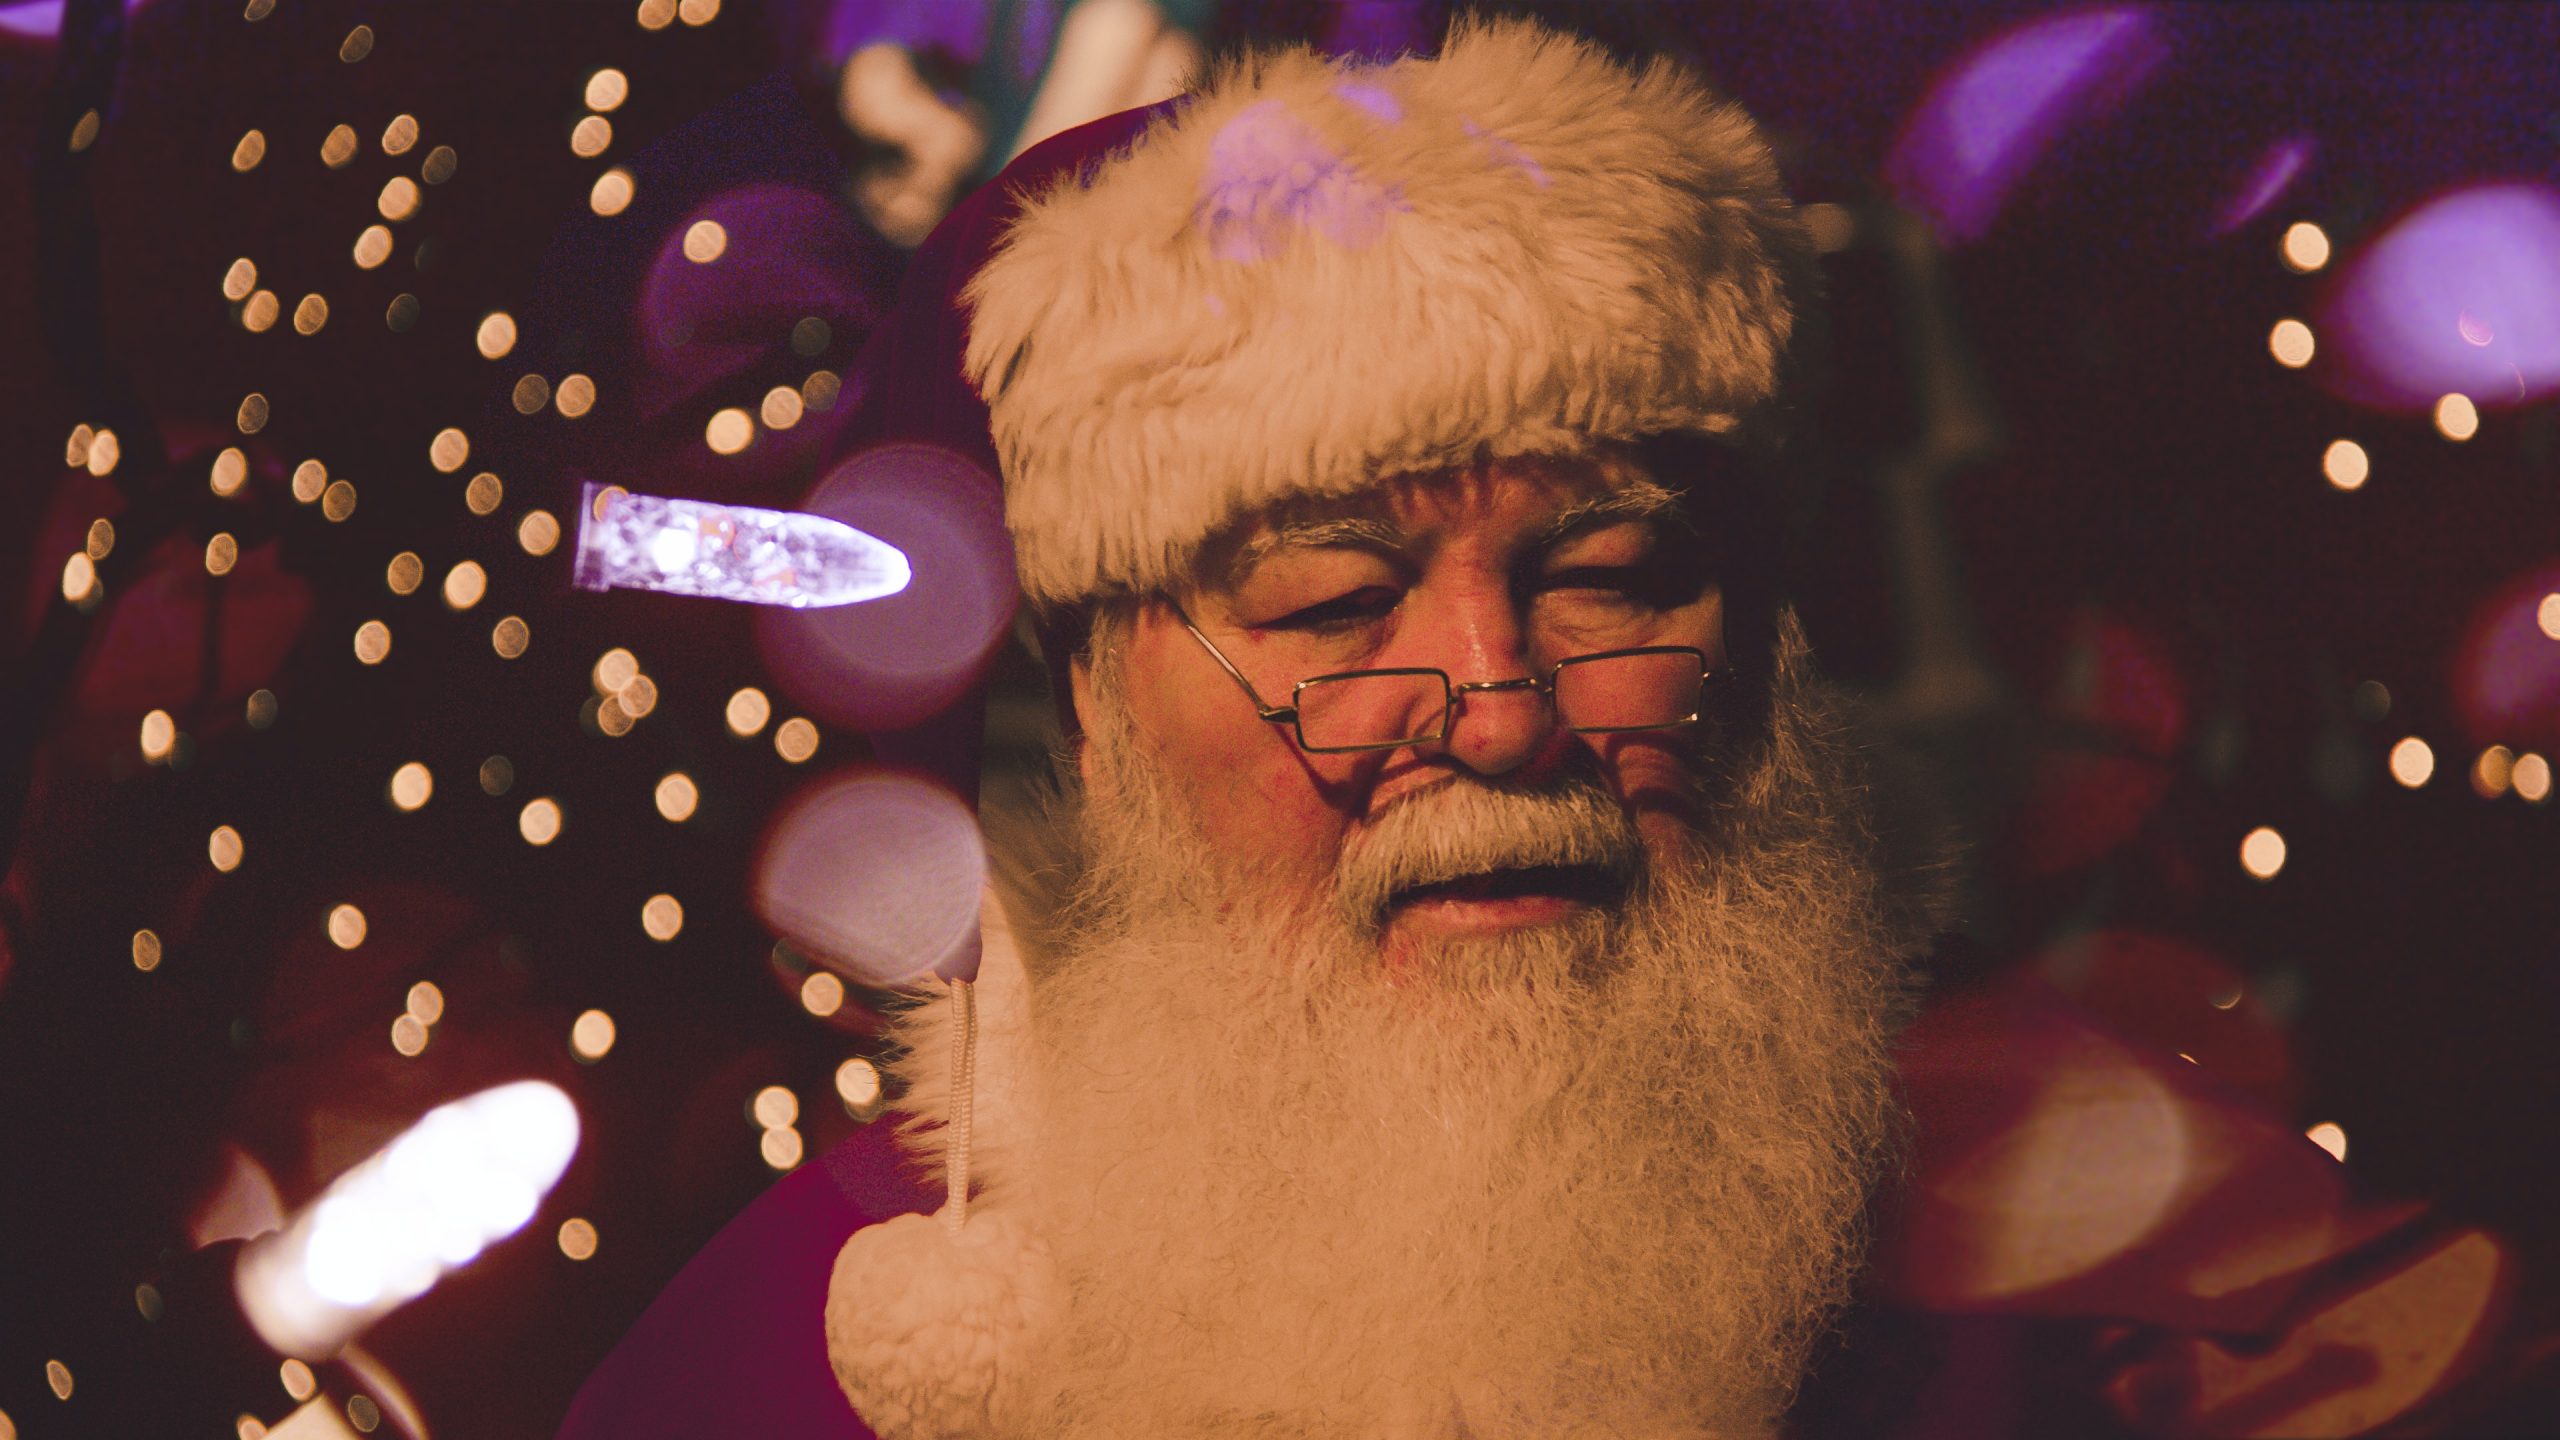 A man dressed up as Santa Claus surrounded by Christmas-themed decorations